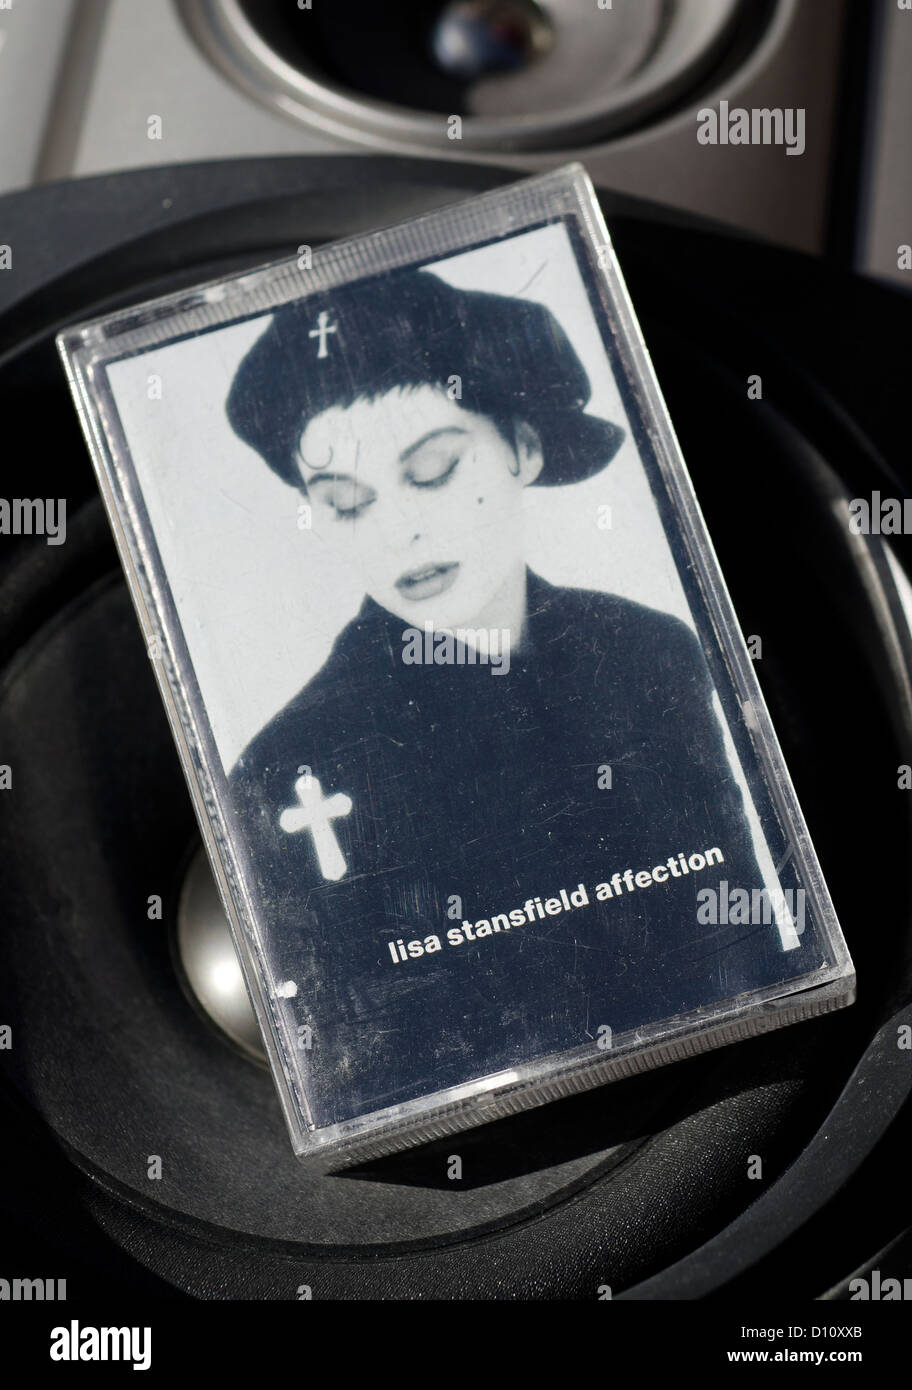 Audio Cassette Tape of Lisa Stansfield, Affection Album. Stock Photo